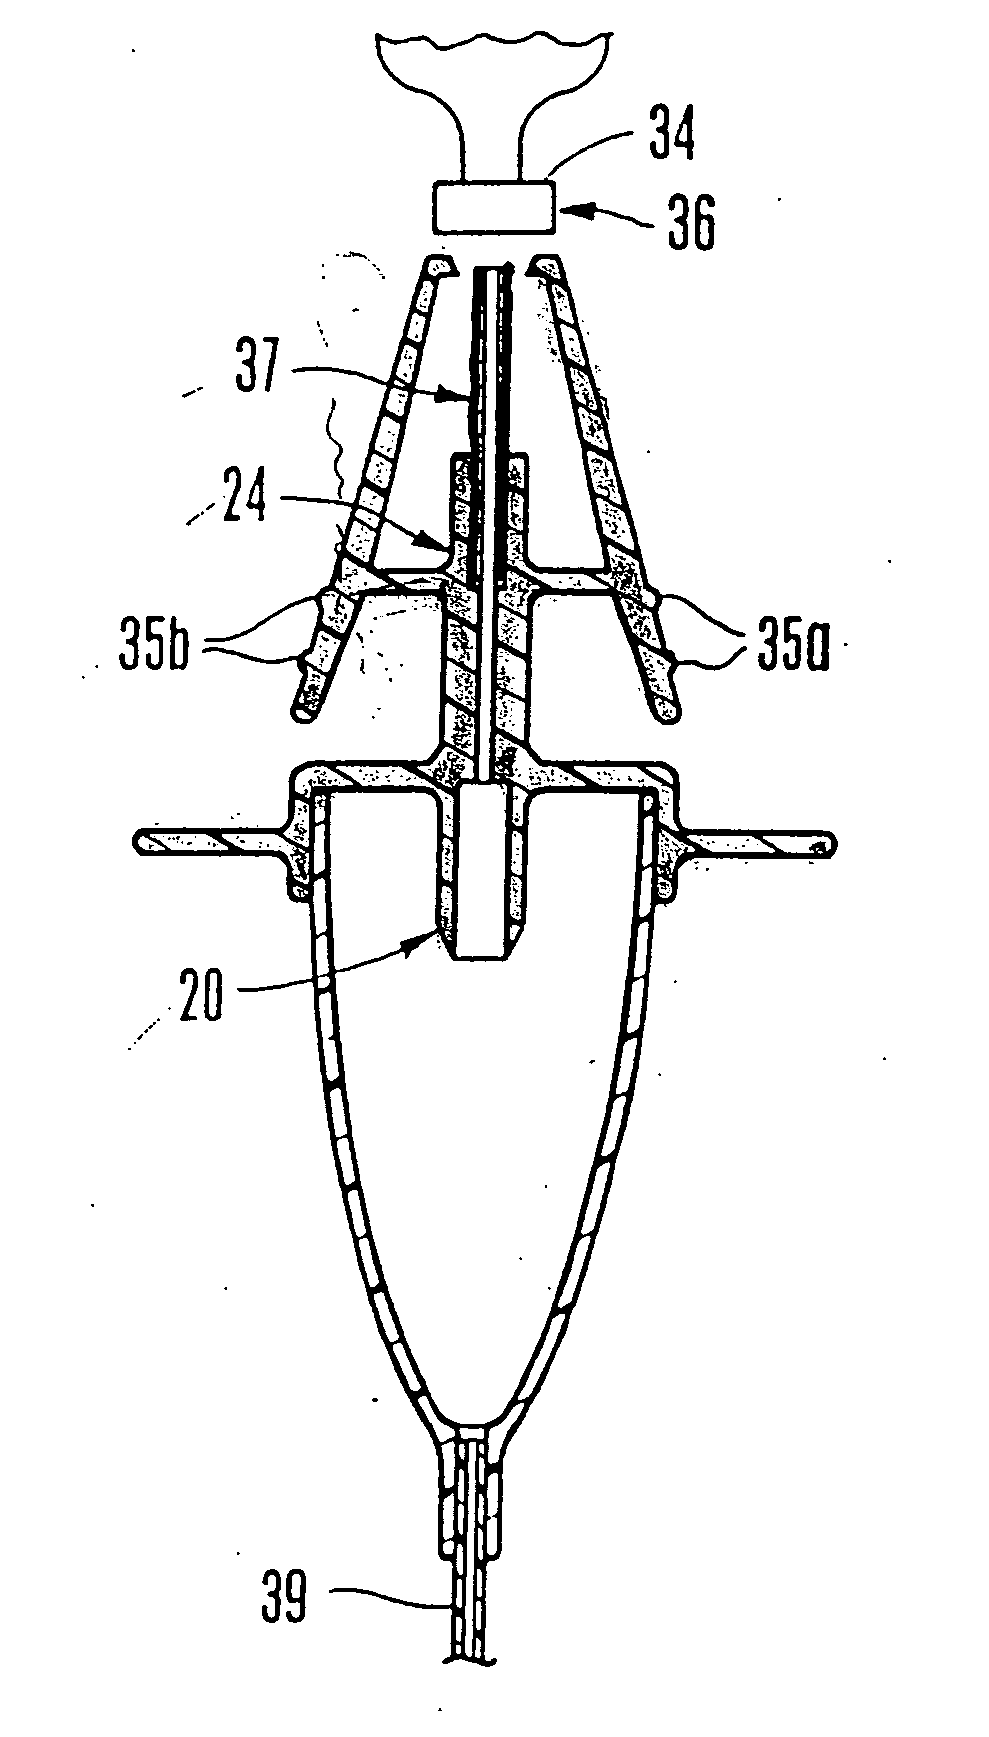 Spikeless connection and drip chamber with valve